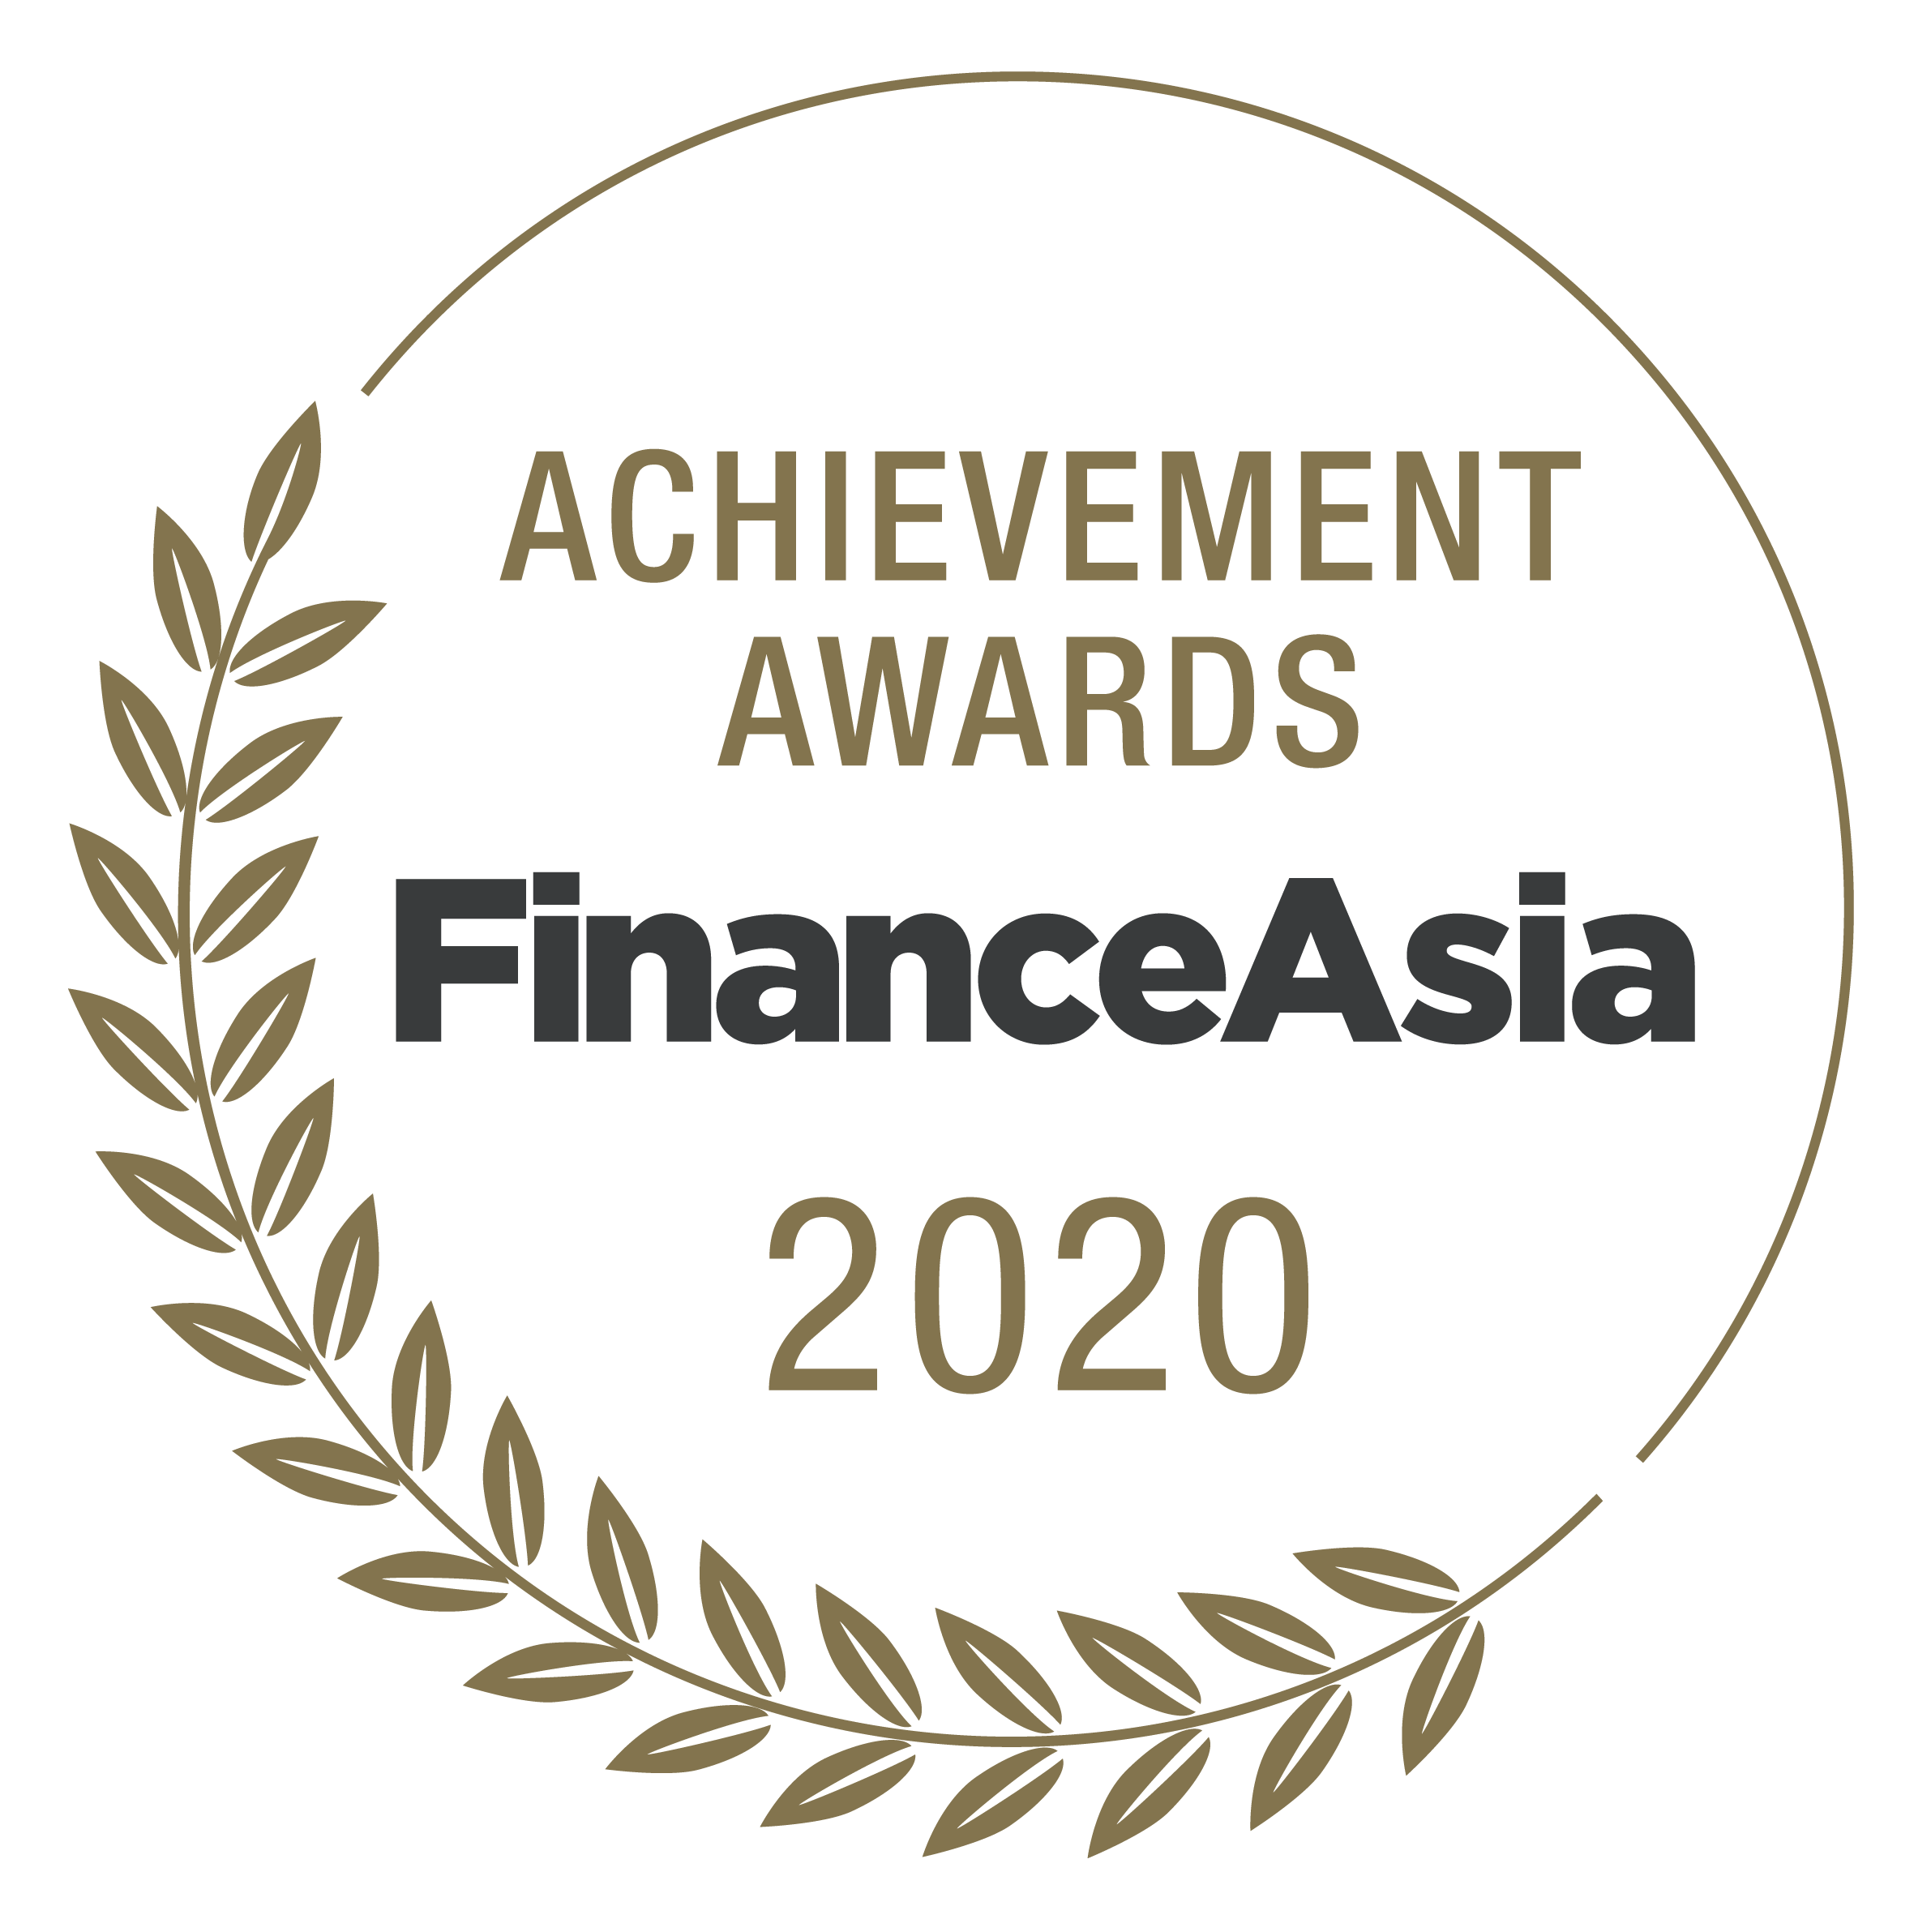 finance-asia-achievement-awards-2020-logo-full-color.png